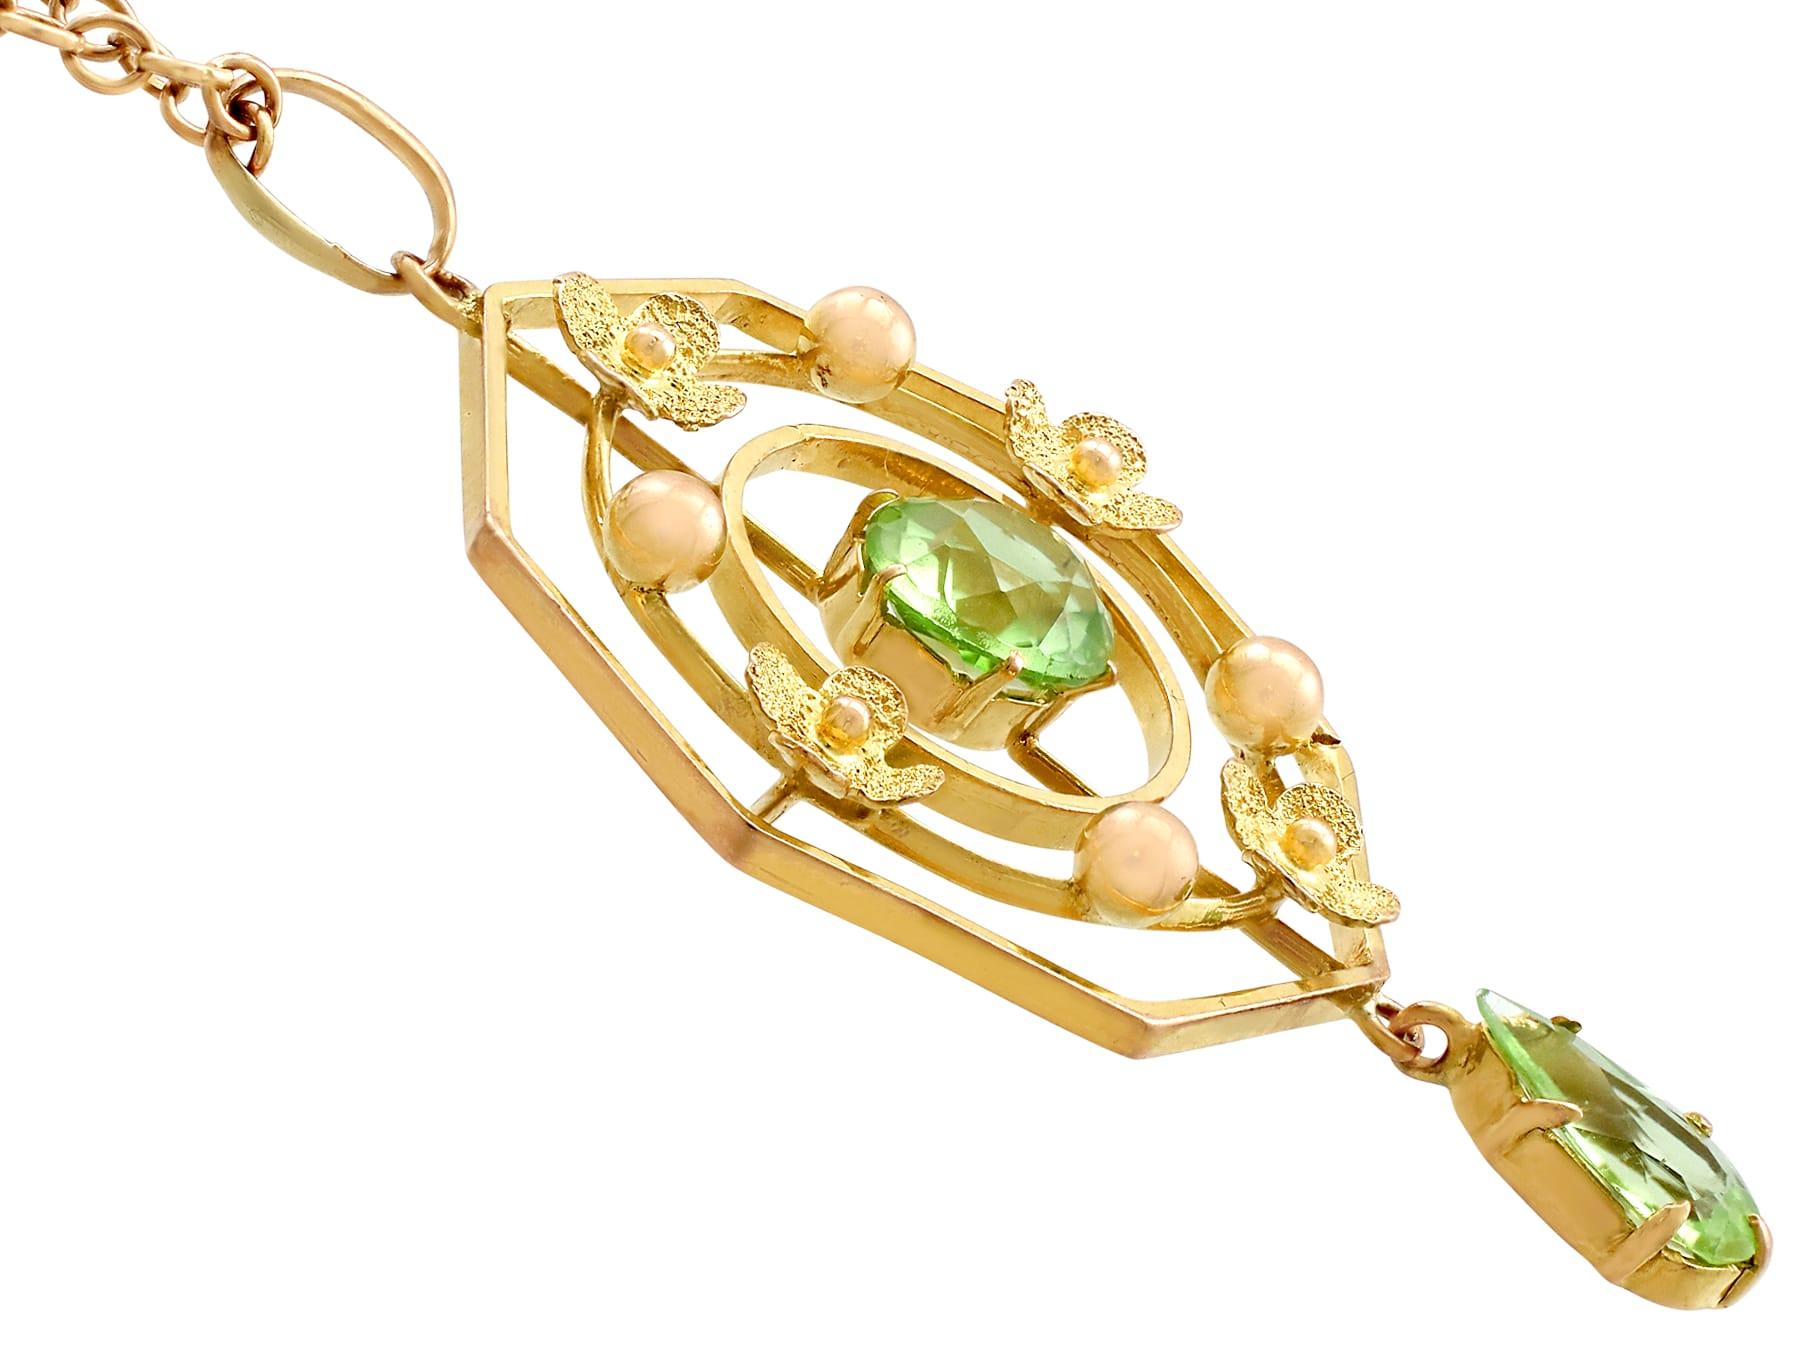 1930s 1.15 Carat Peridot and Yellow Gold Pendant In Excellent Condition For Sale In Jesmond, Newcastle Upon Tyne